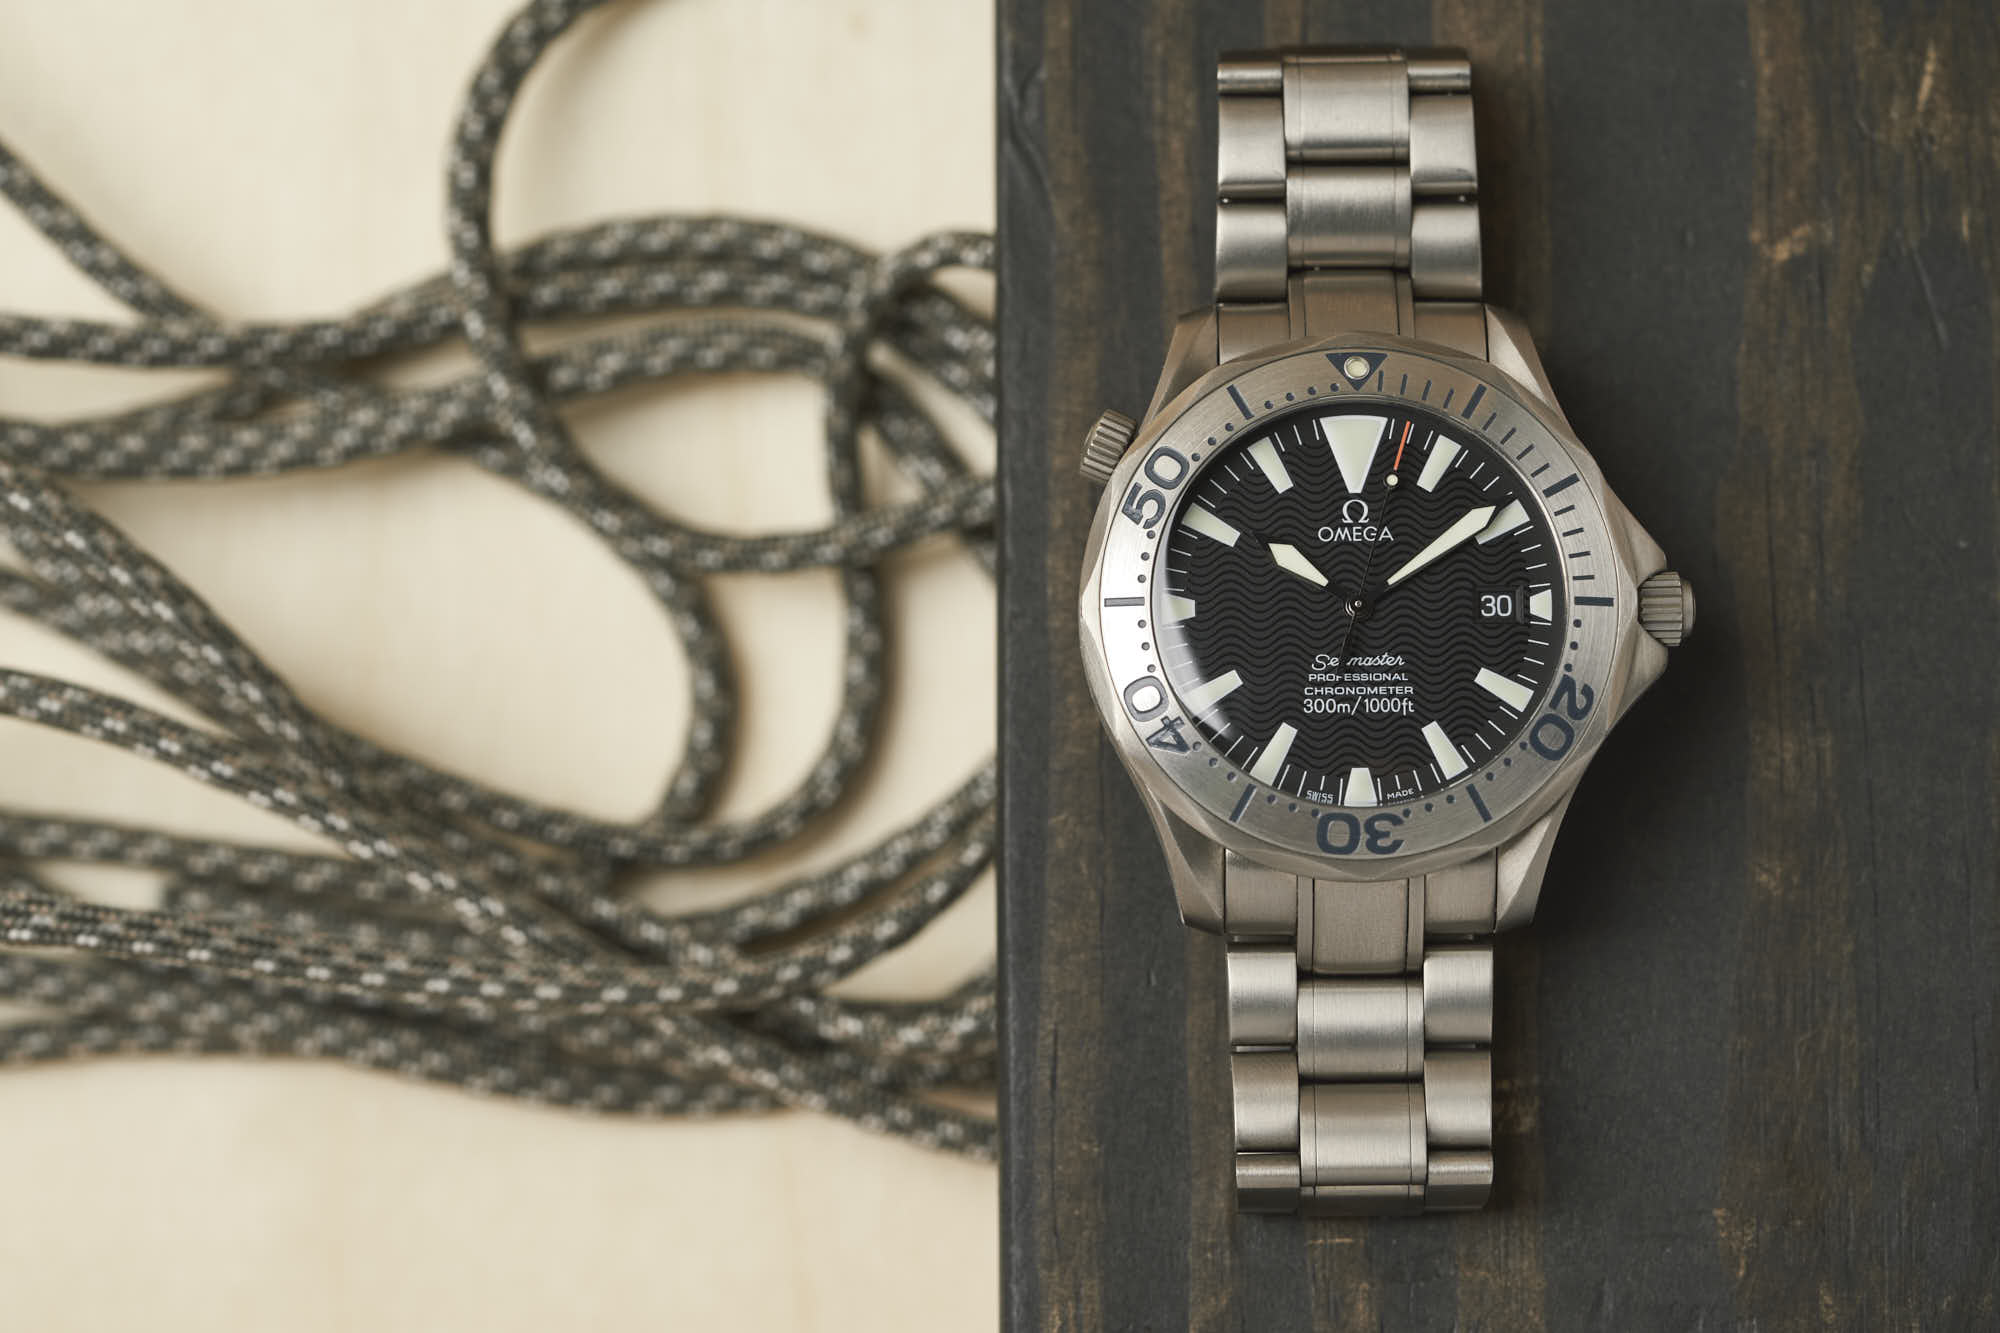 VIDEO] Missed Review: The Titanium Omega Seamaster 300